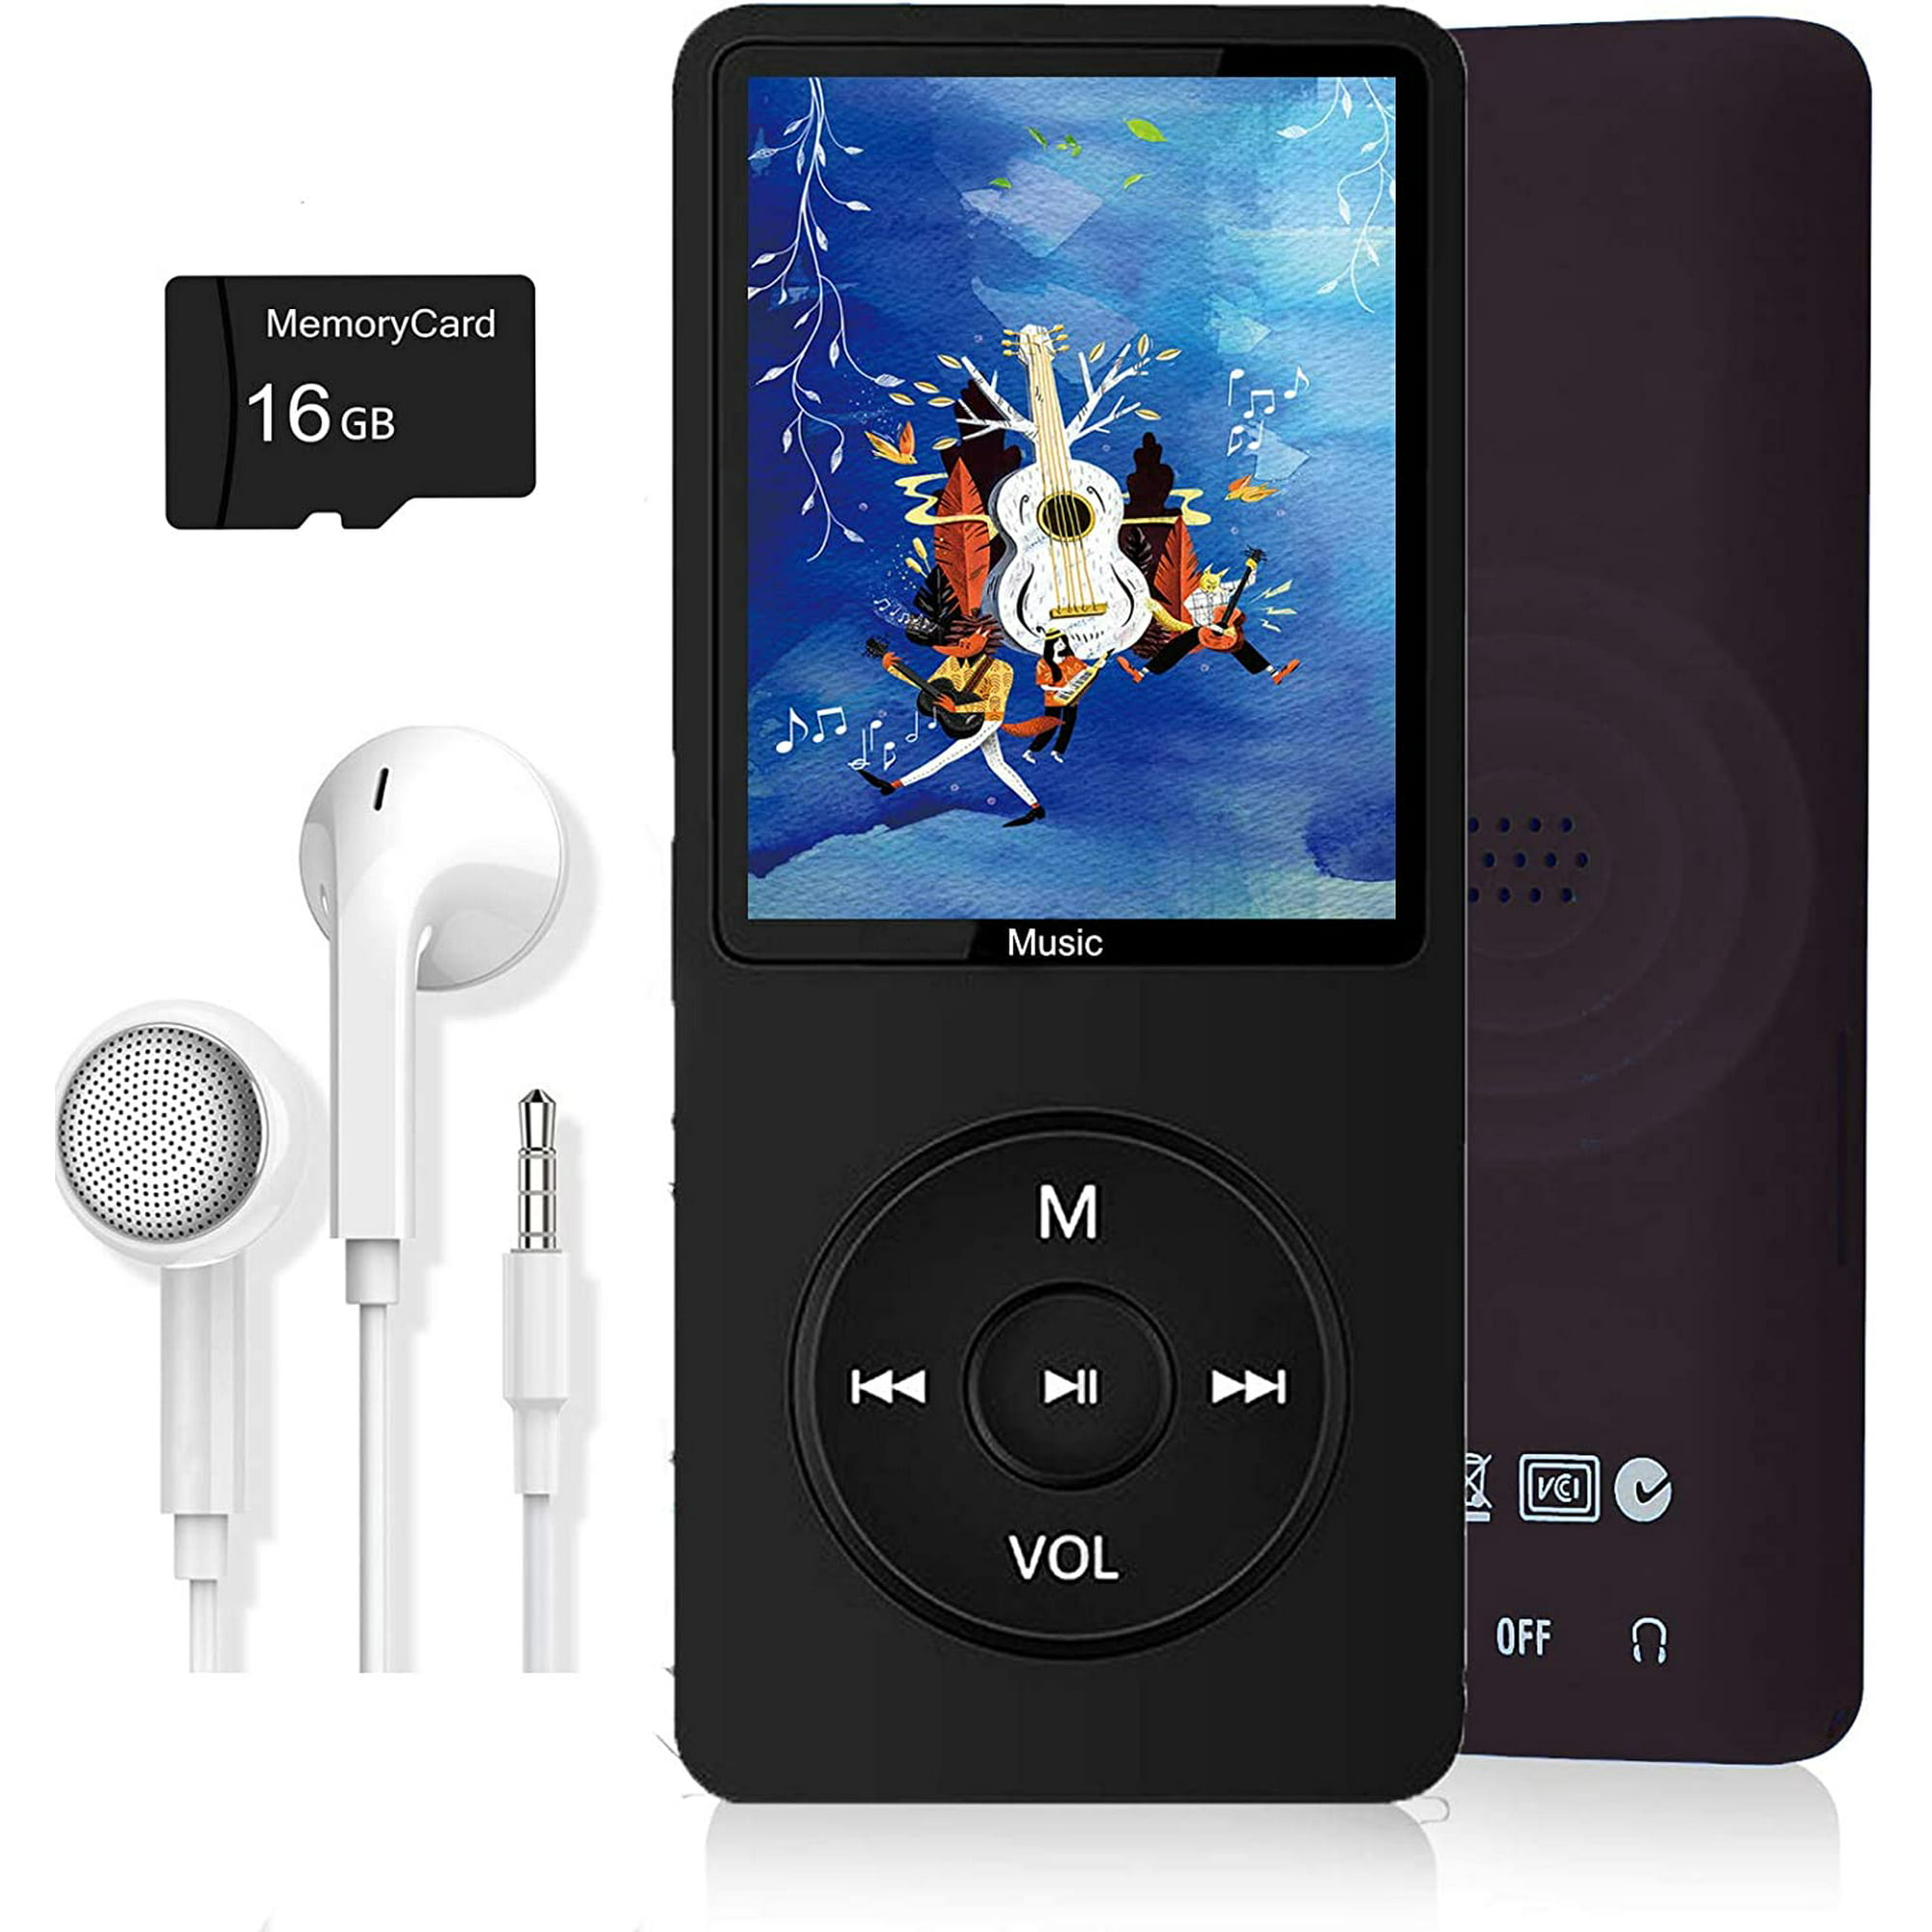 Reproductor CD/MP3 Portátil Muse MD900